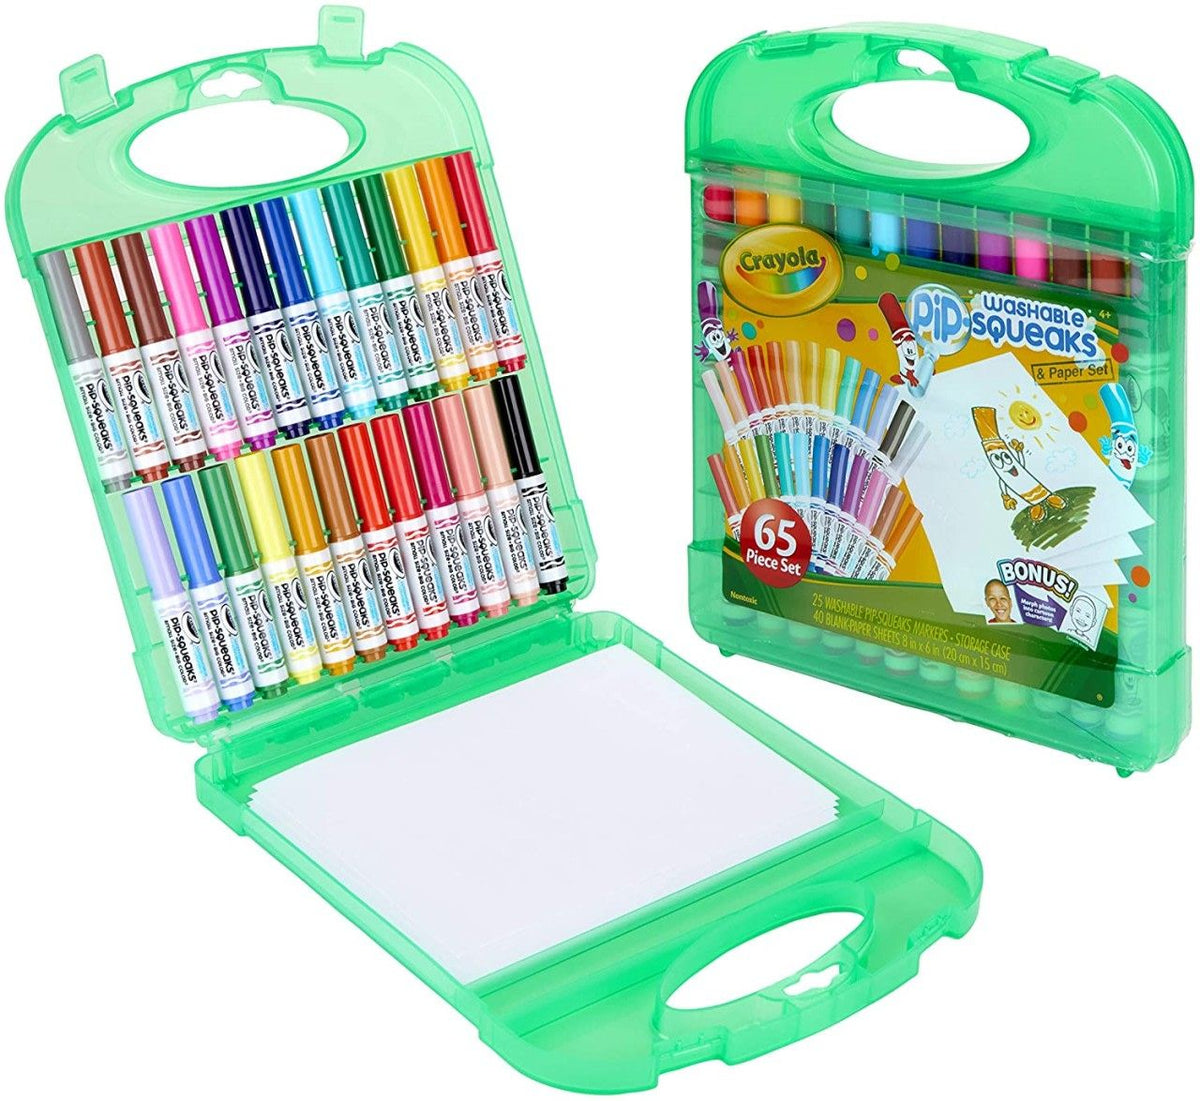 Pip Squeaks Washable Markers Kit – School House GB